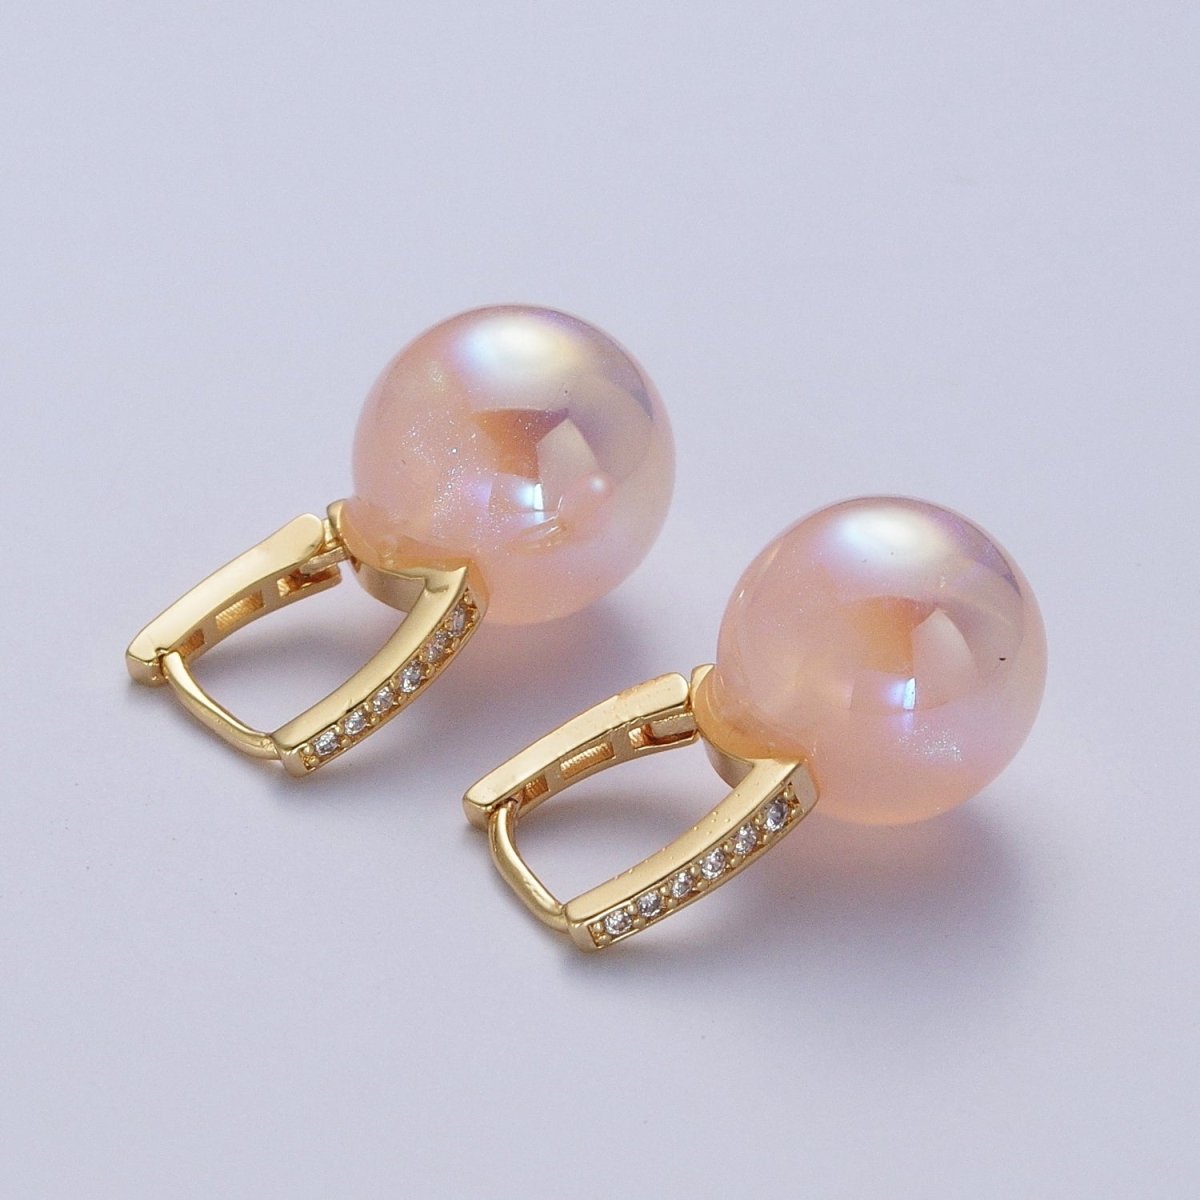 24K Gold Filled Leverback Earrings Small Huggie Hoops Earrings with Round Ball Pastel AB Color Drop Q-339 Q-353 Q-394 Q-395 Q-408 - DLUXCA